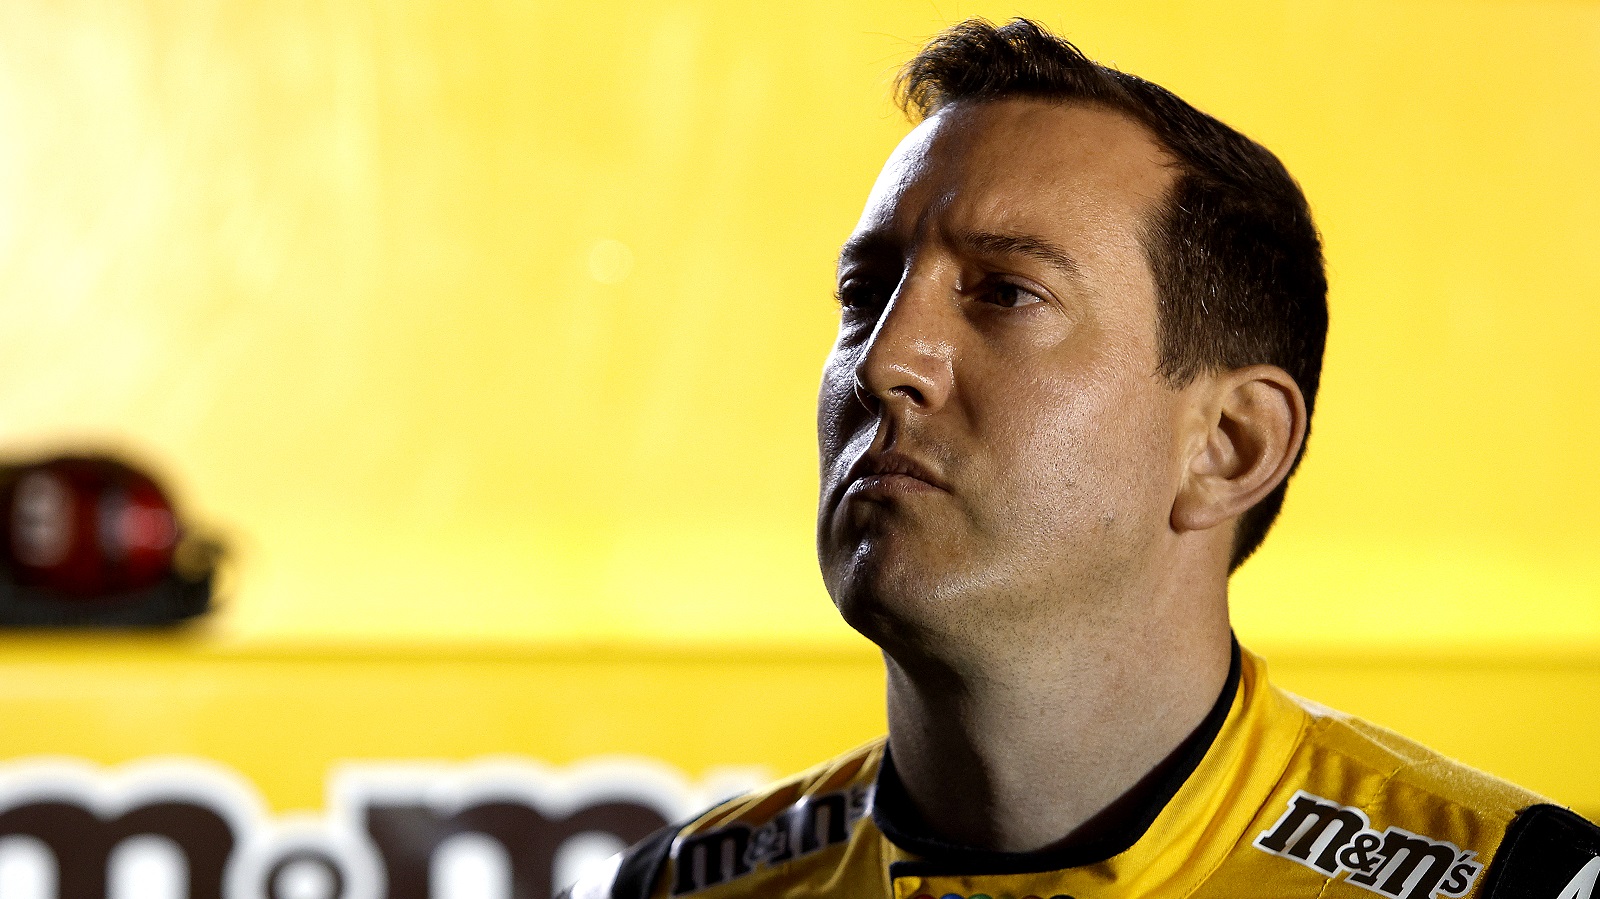 Kyle Busch, driver of the No. 18 Toyota, looks on during qualifying for the NASCAR Cup Series Daytona 500 on Feb. 16, 2022.